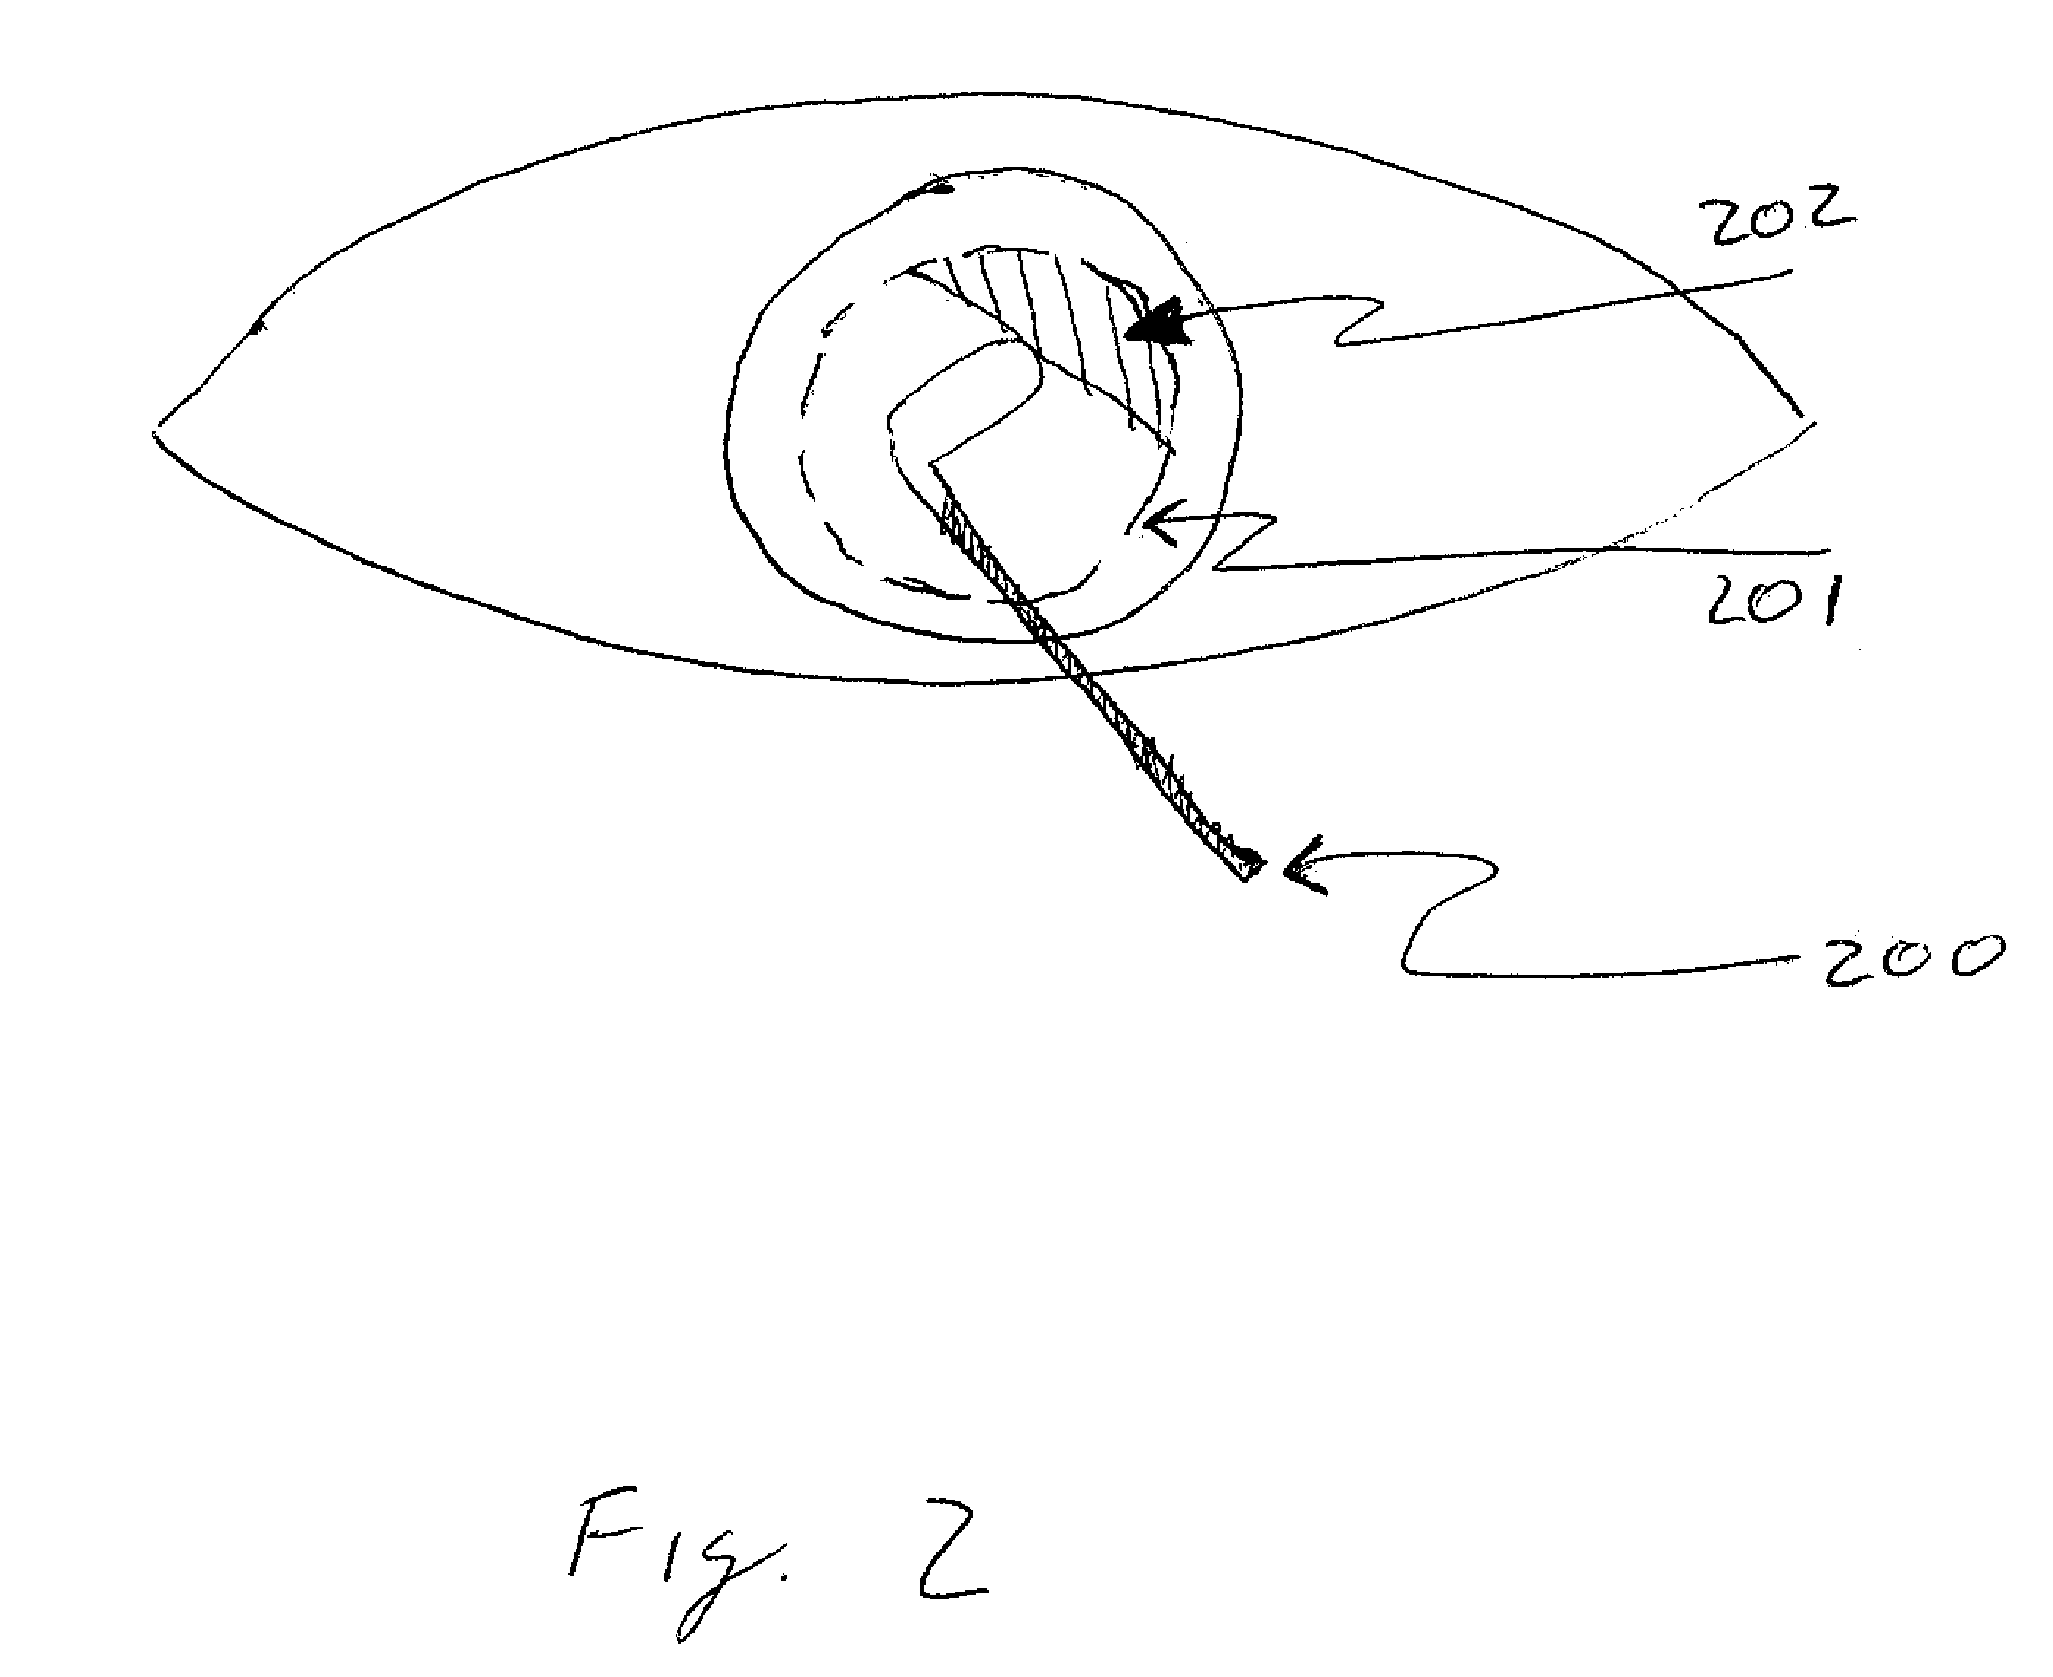 Apparatus and method for removing epithelium from the cornea